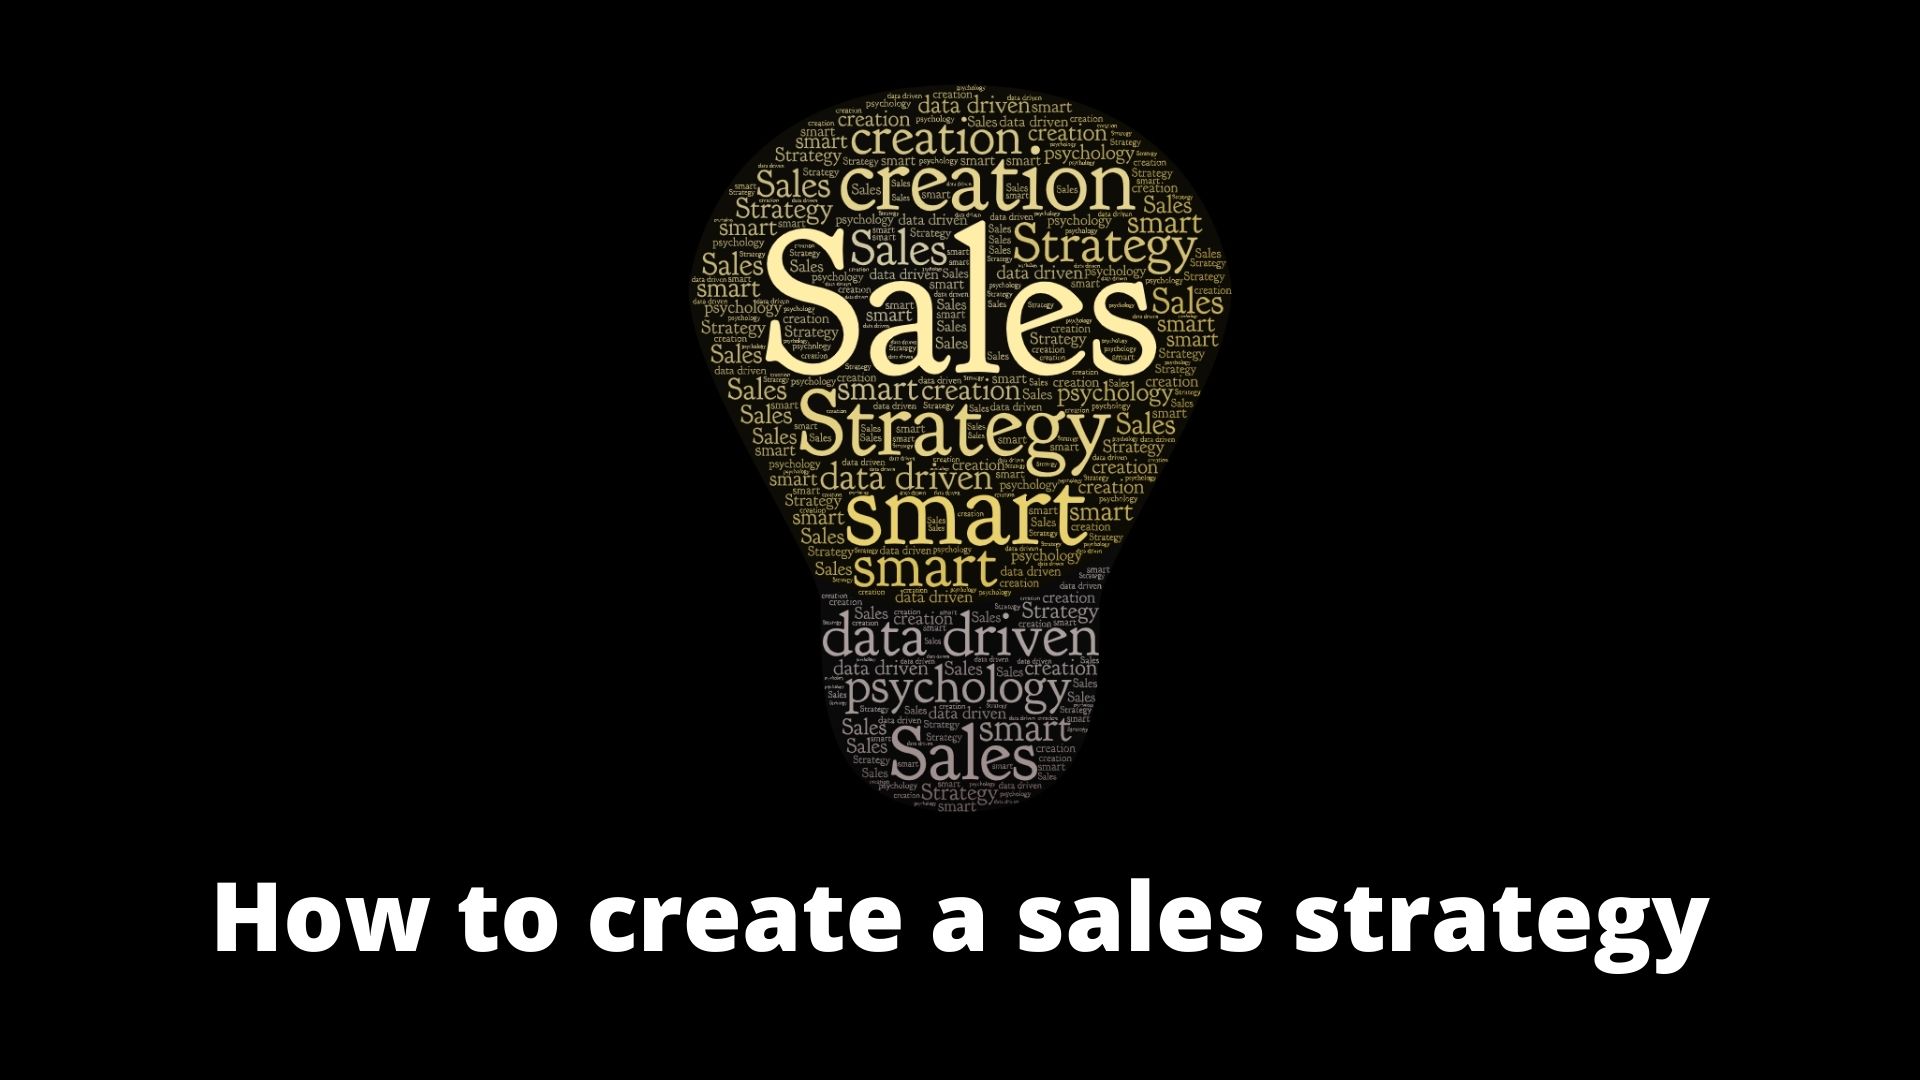 How to create a sales strategy